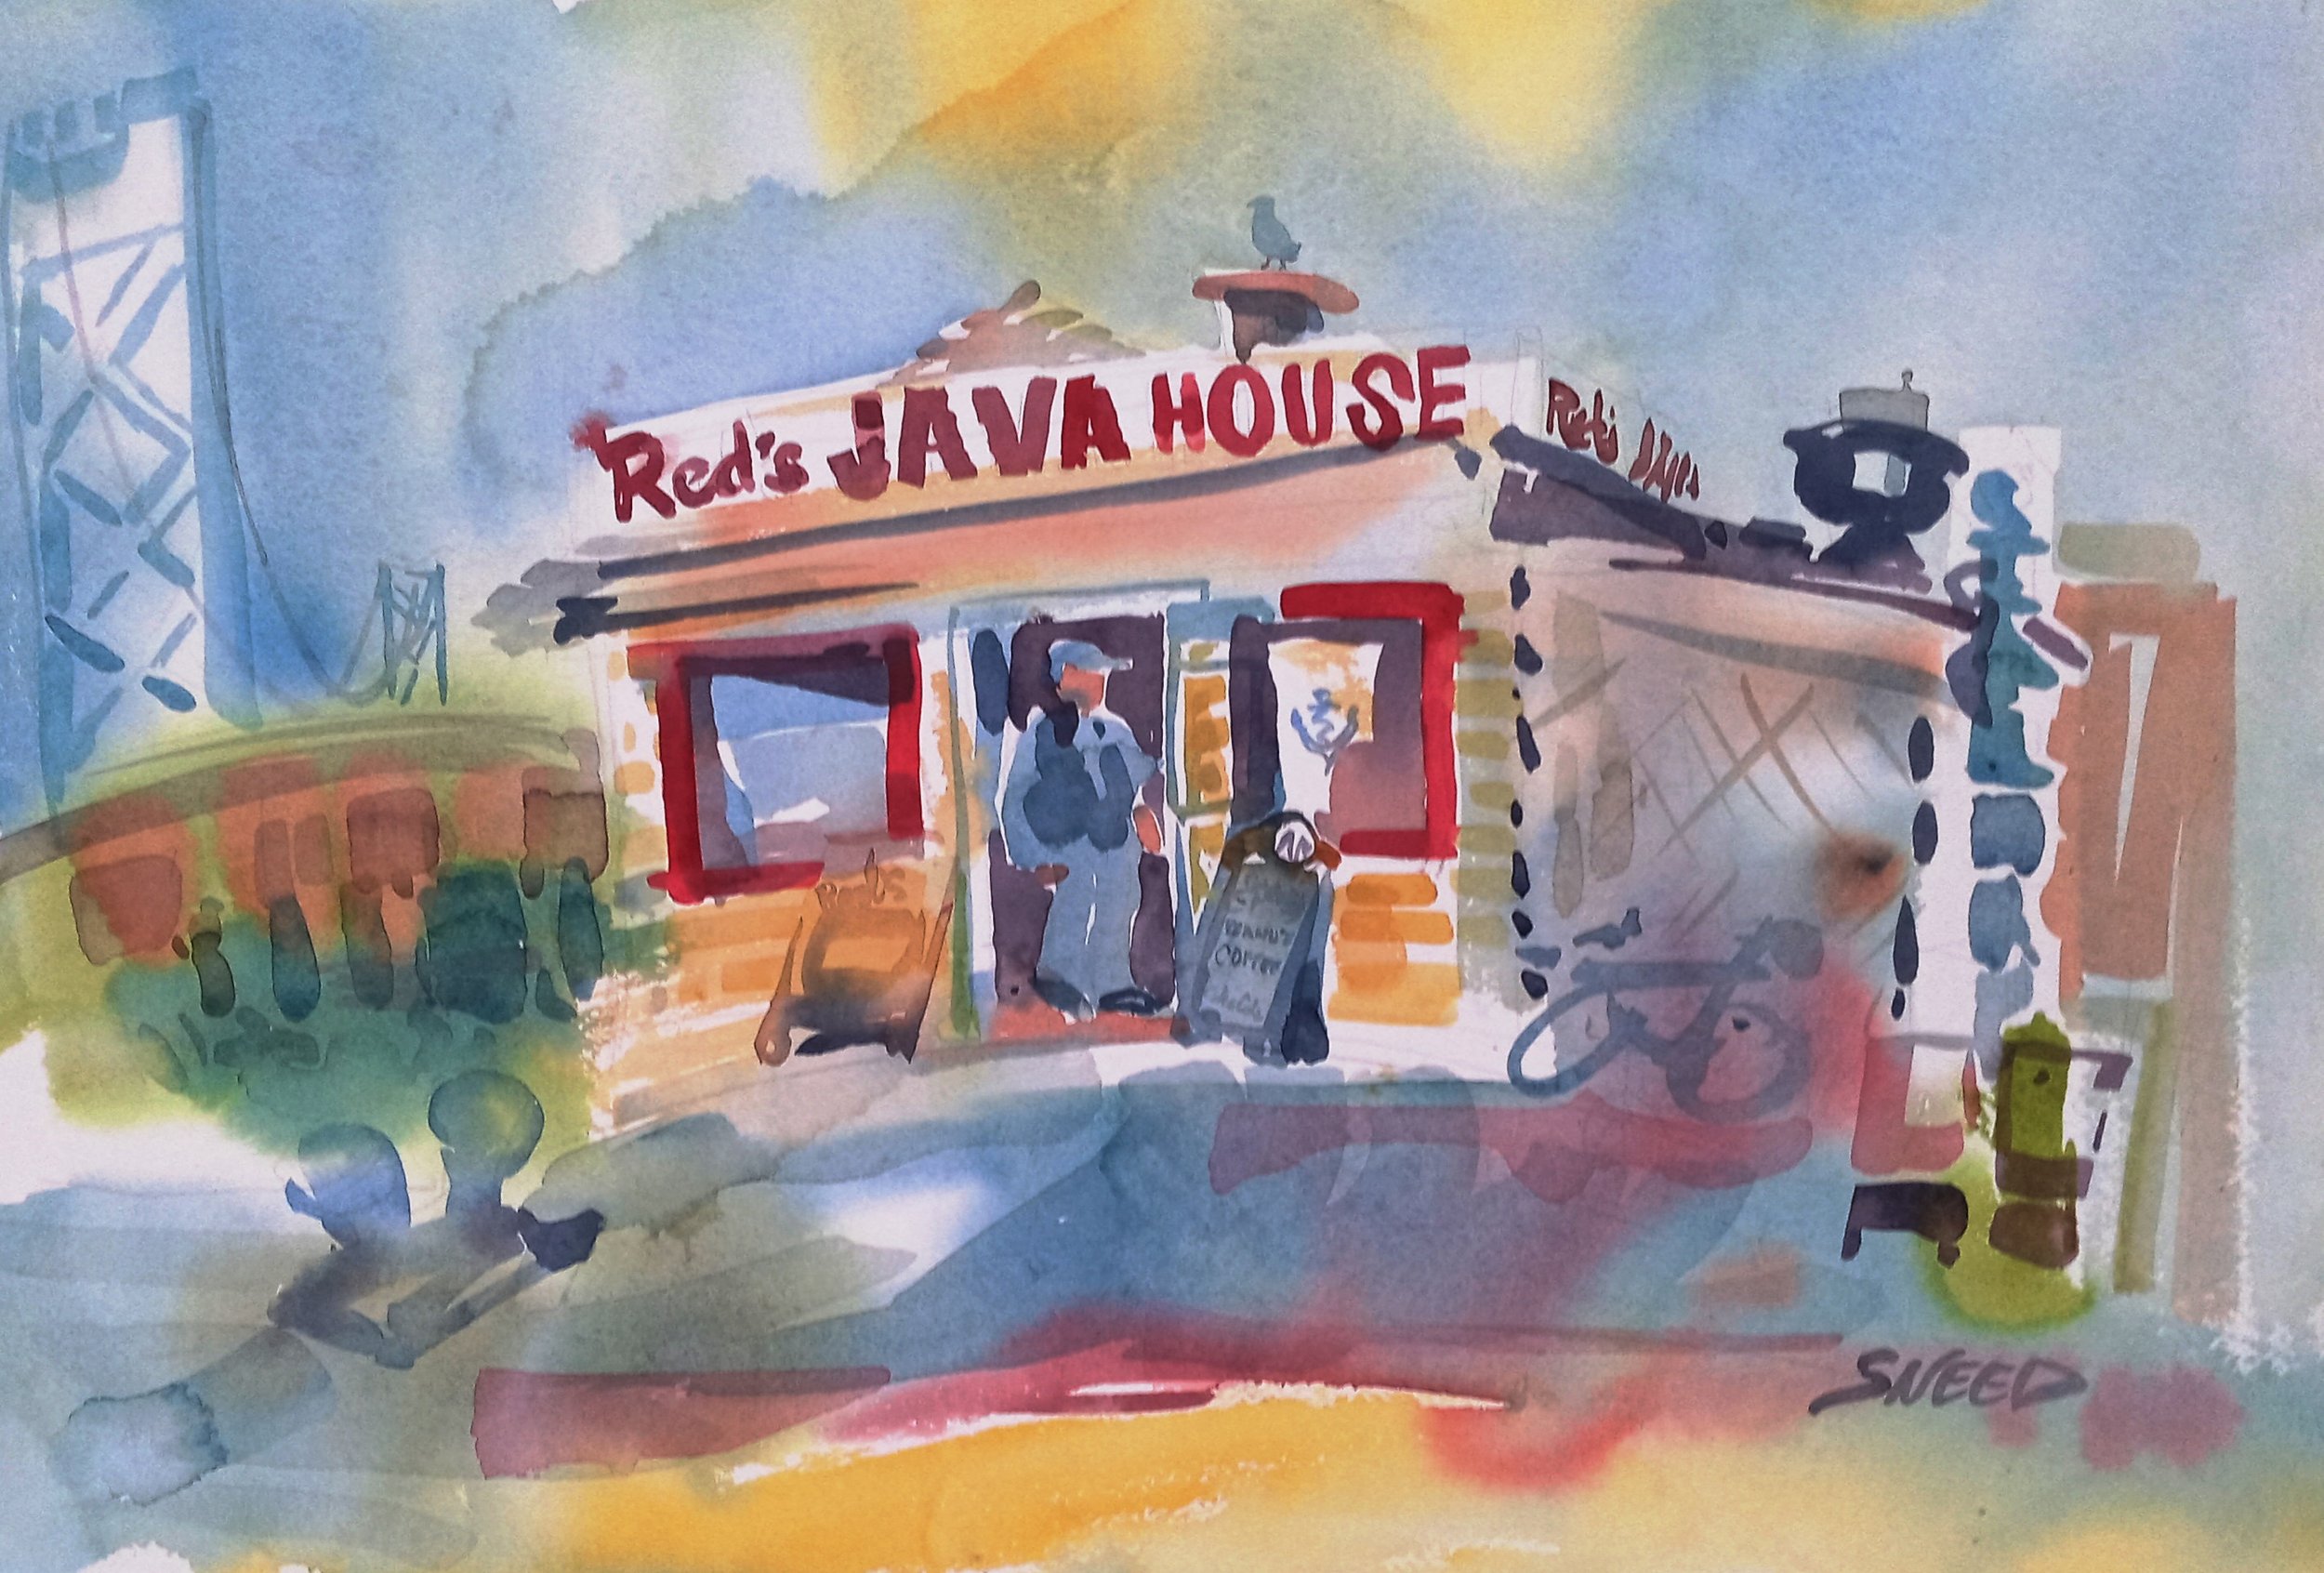 Red's Java House by Jane Sneed